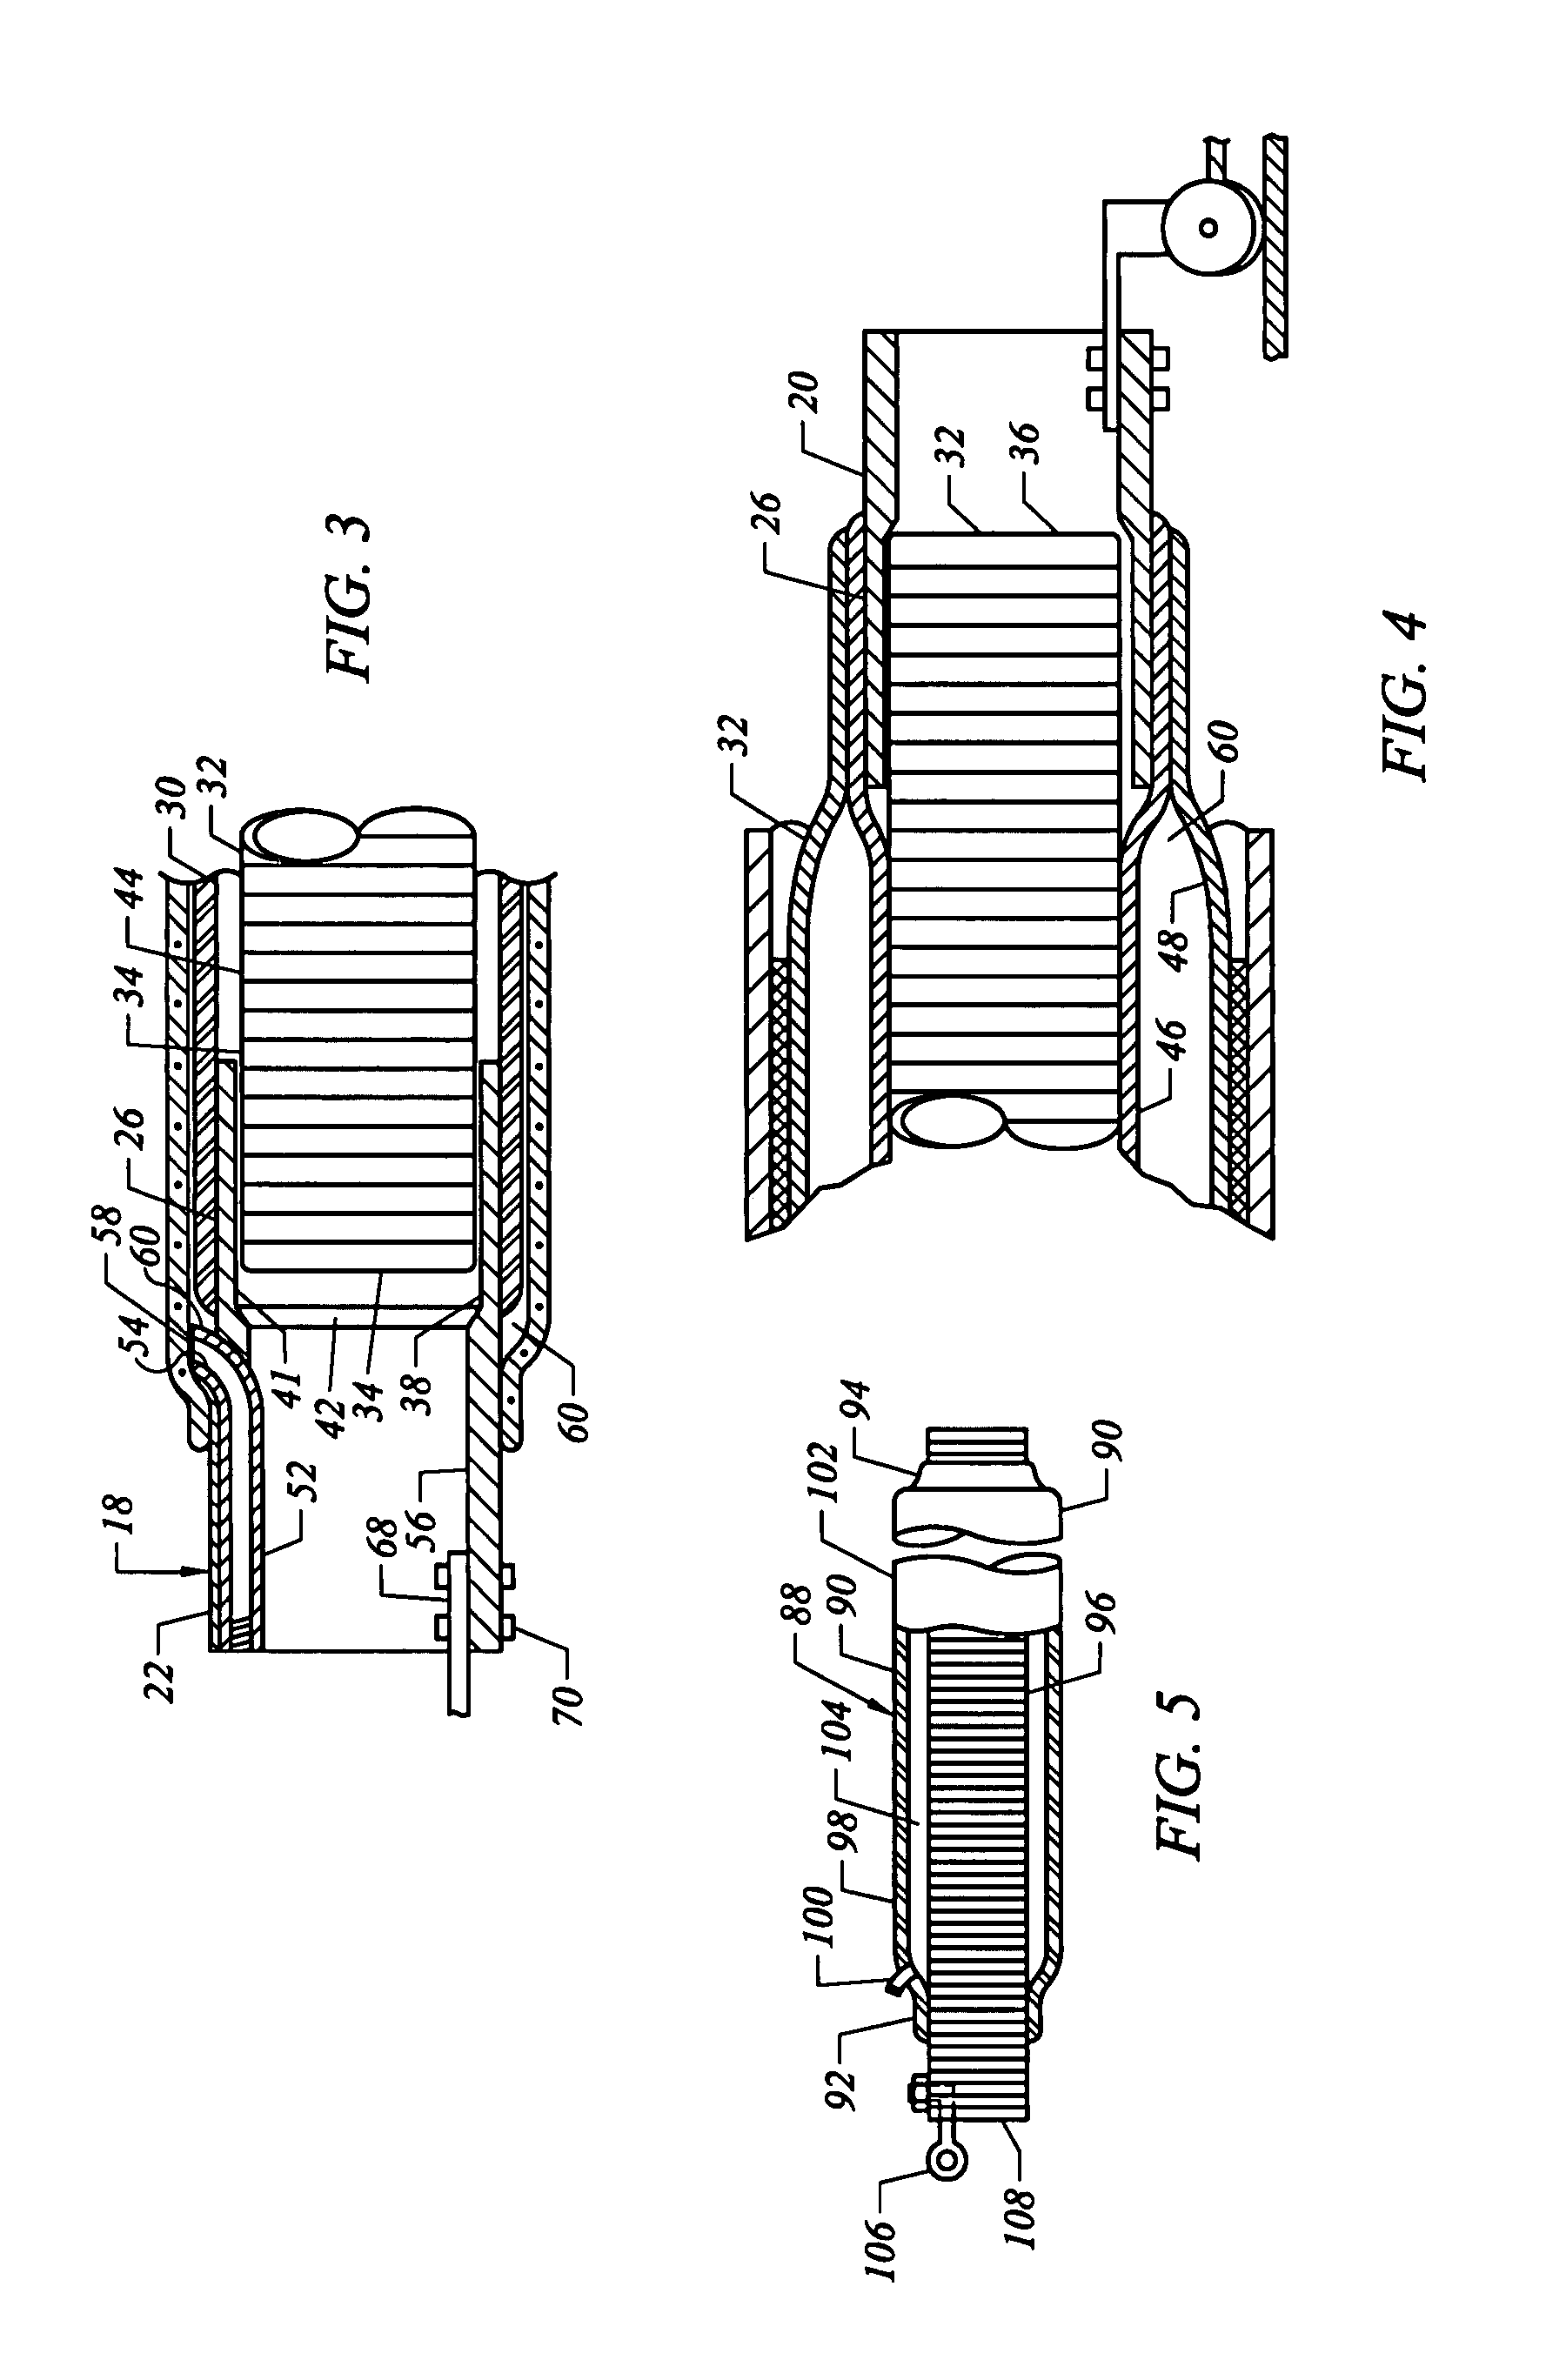 Point repair sleeve carrier for conduits